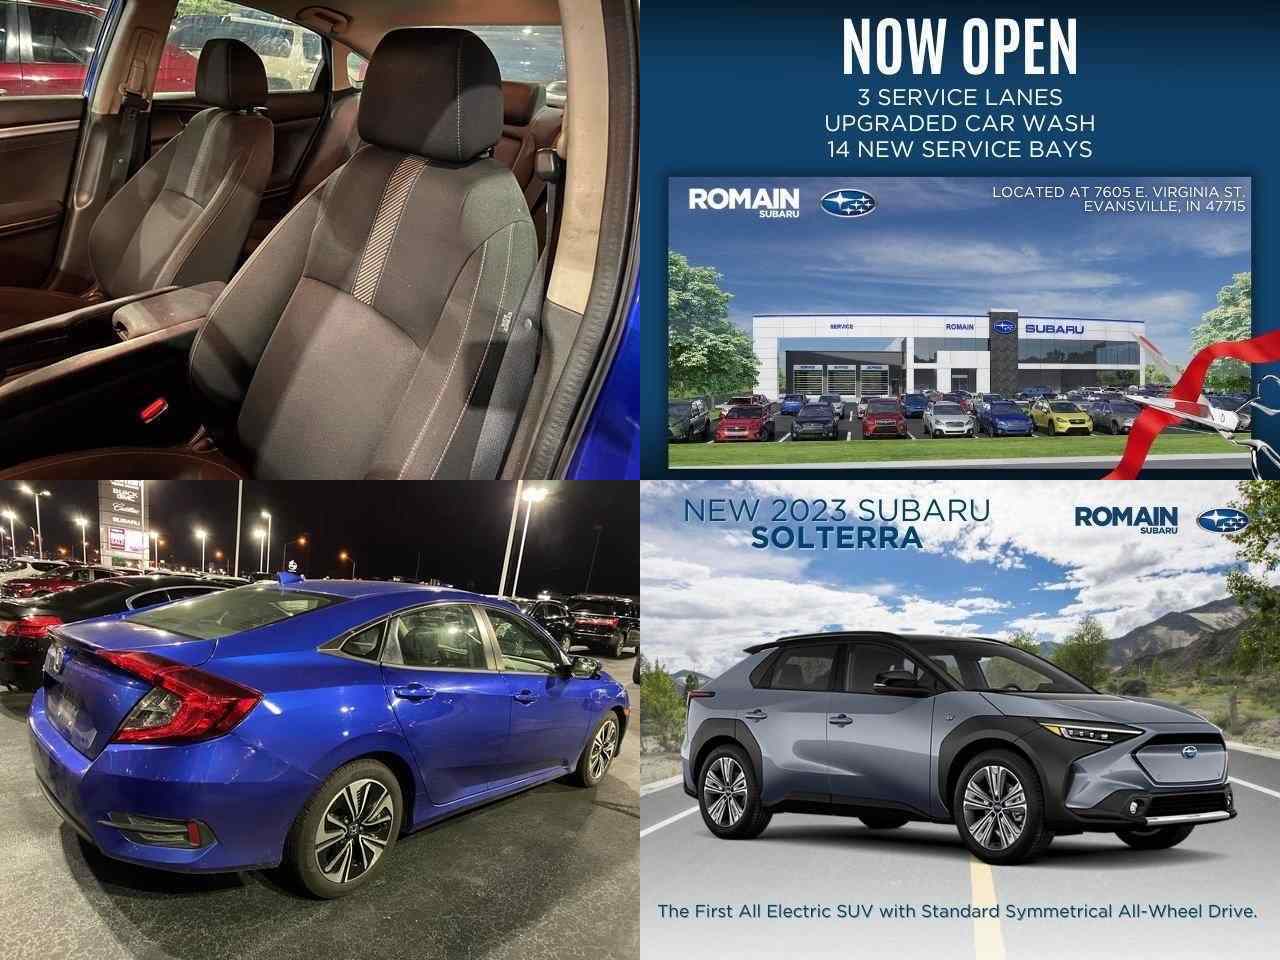 2018 Honda Civic EX-T used for sale near me